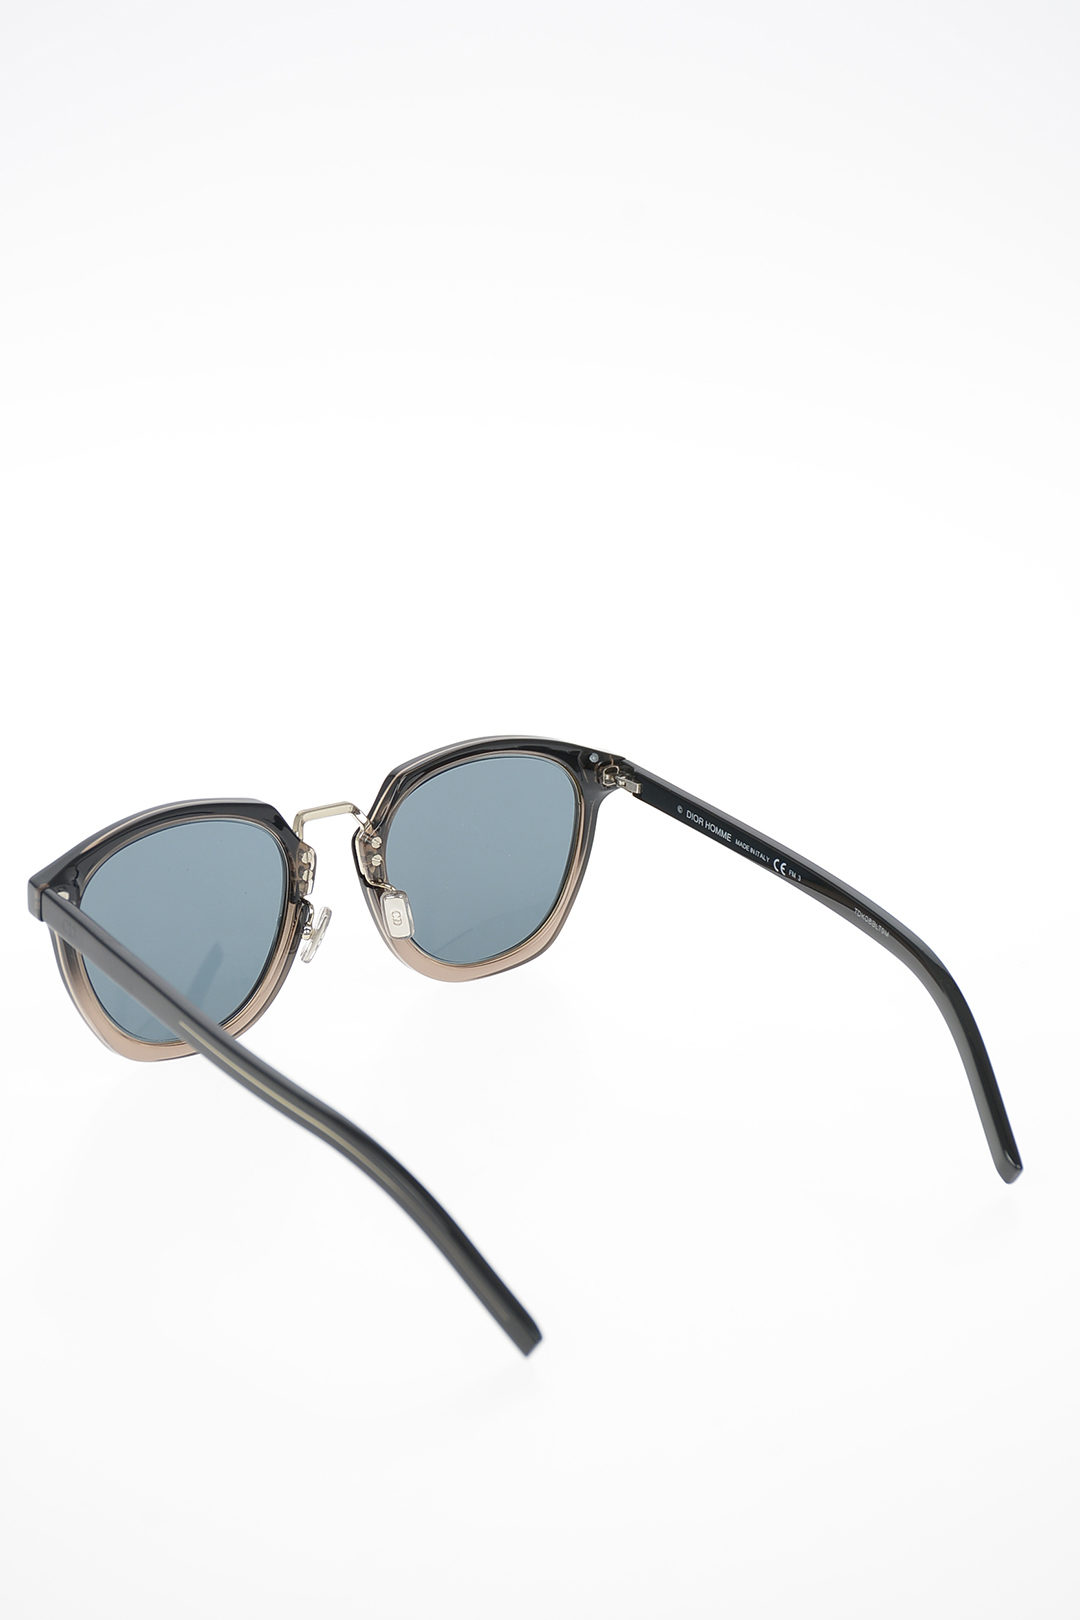 CHRISTIAN DIOR Sunglasses DiorMirrored I22HD  LO Outlet  LookerOnline